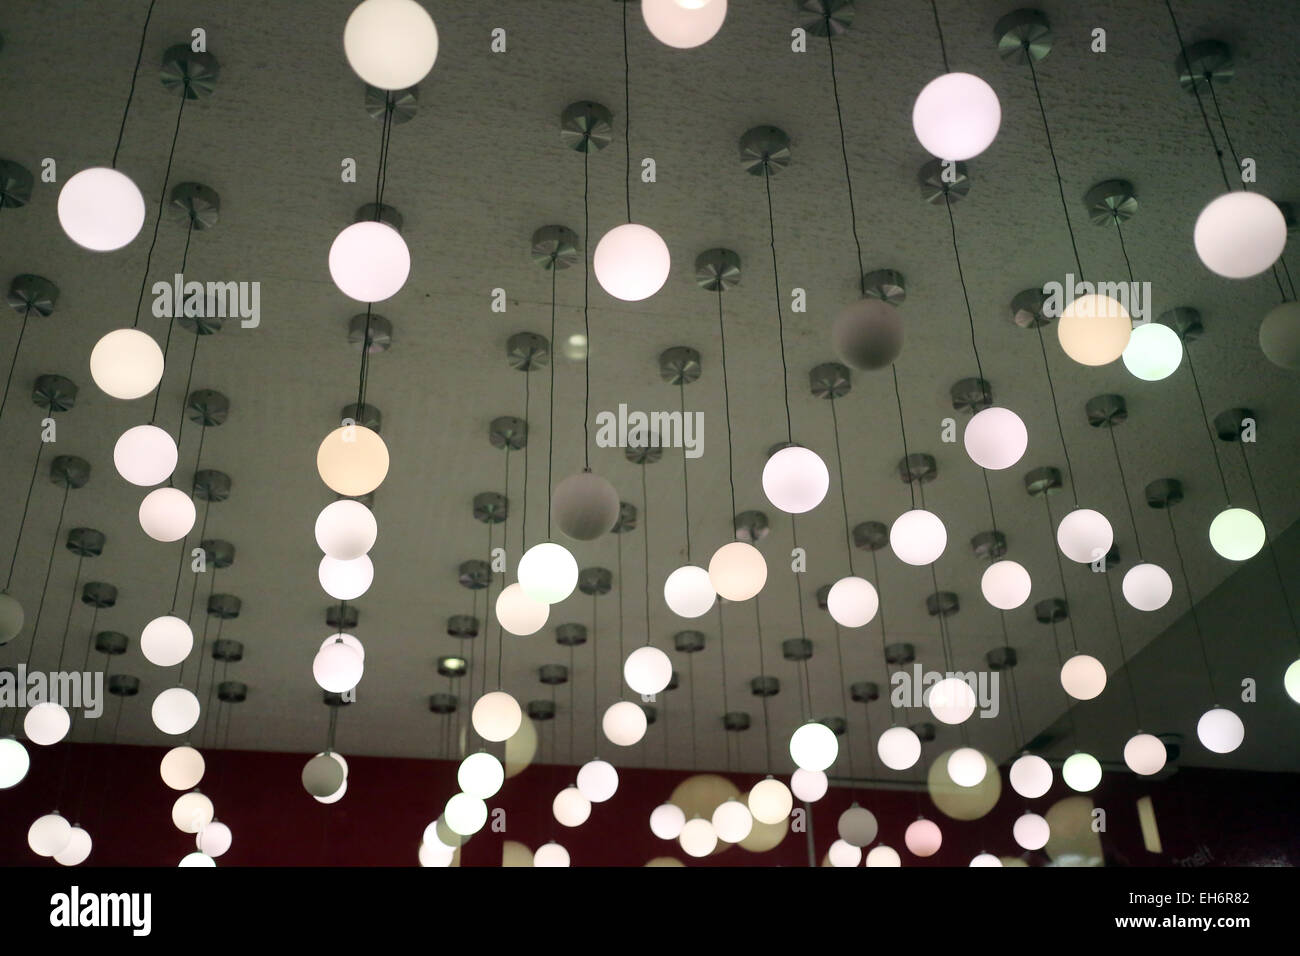 Lamps on the ceiling of the restaurant. Stock Photo